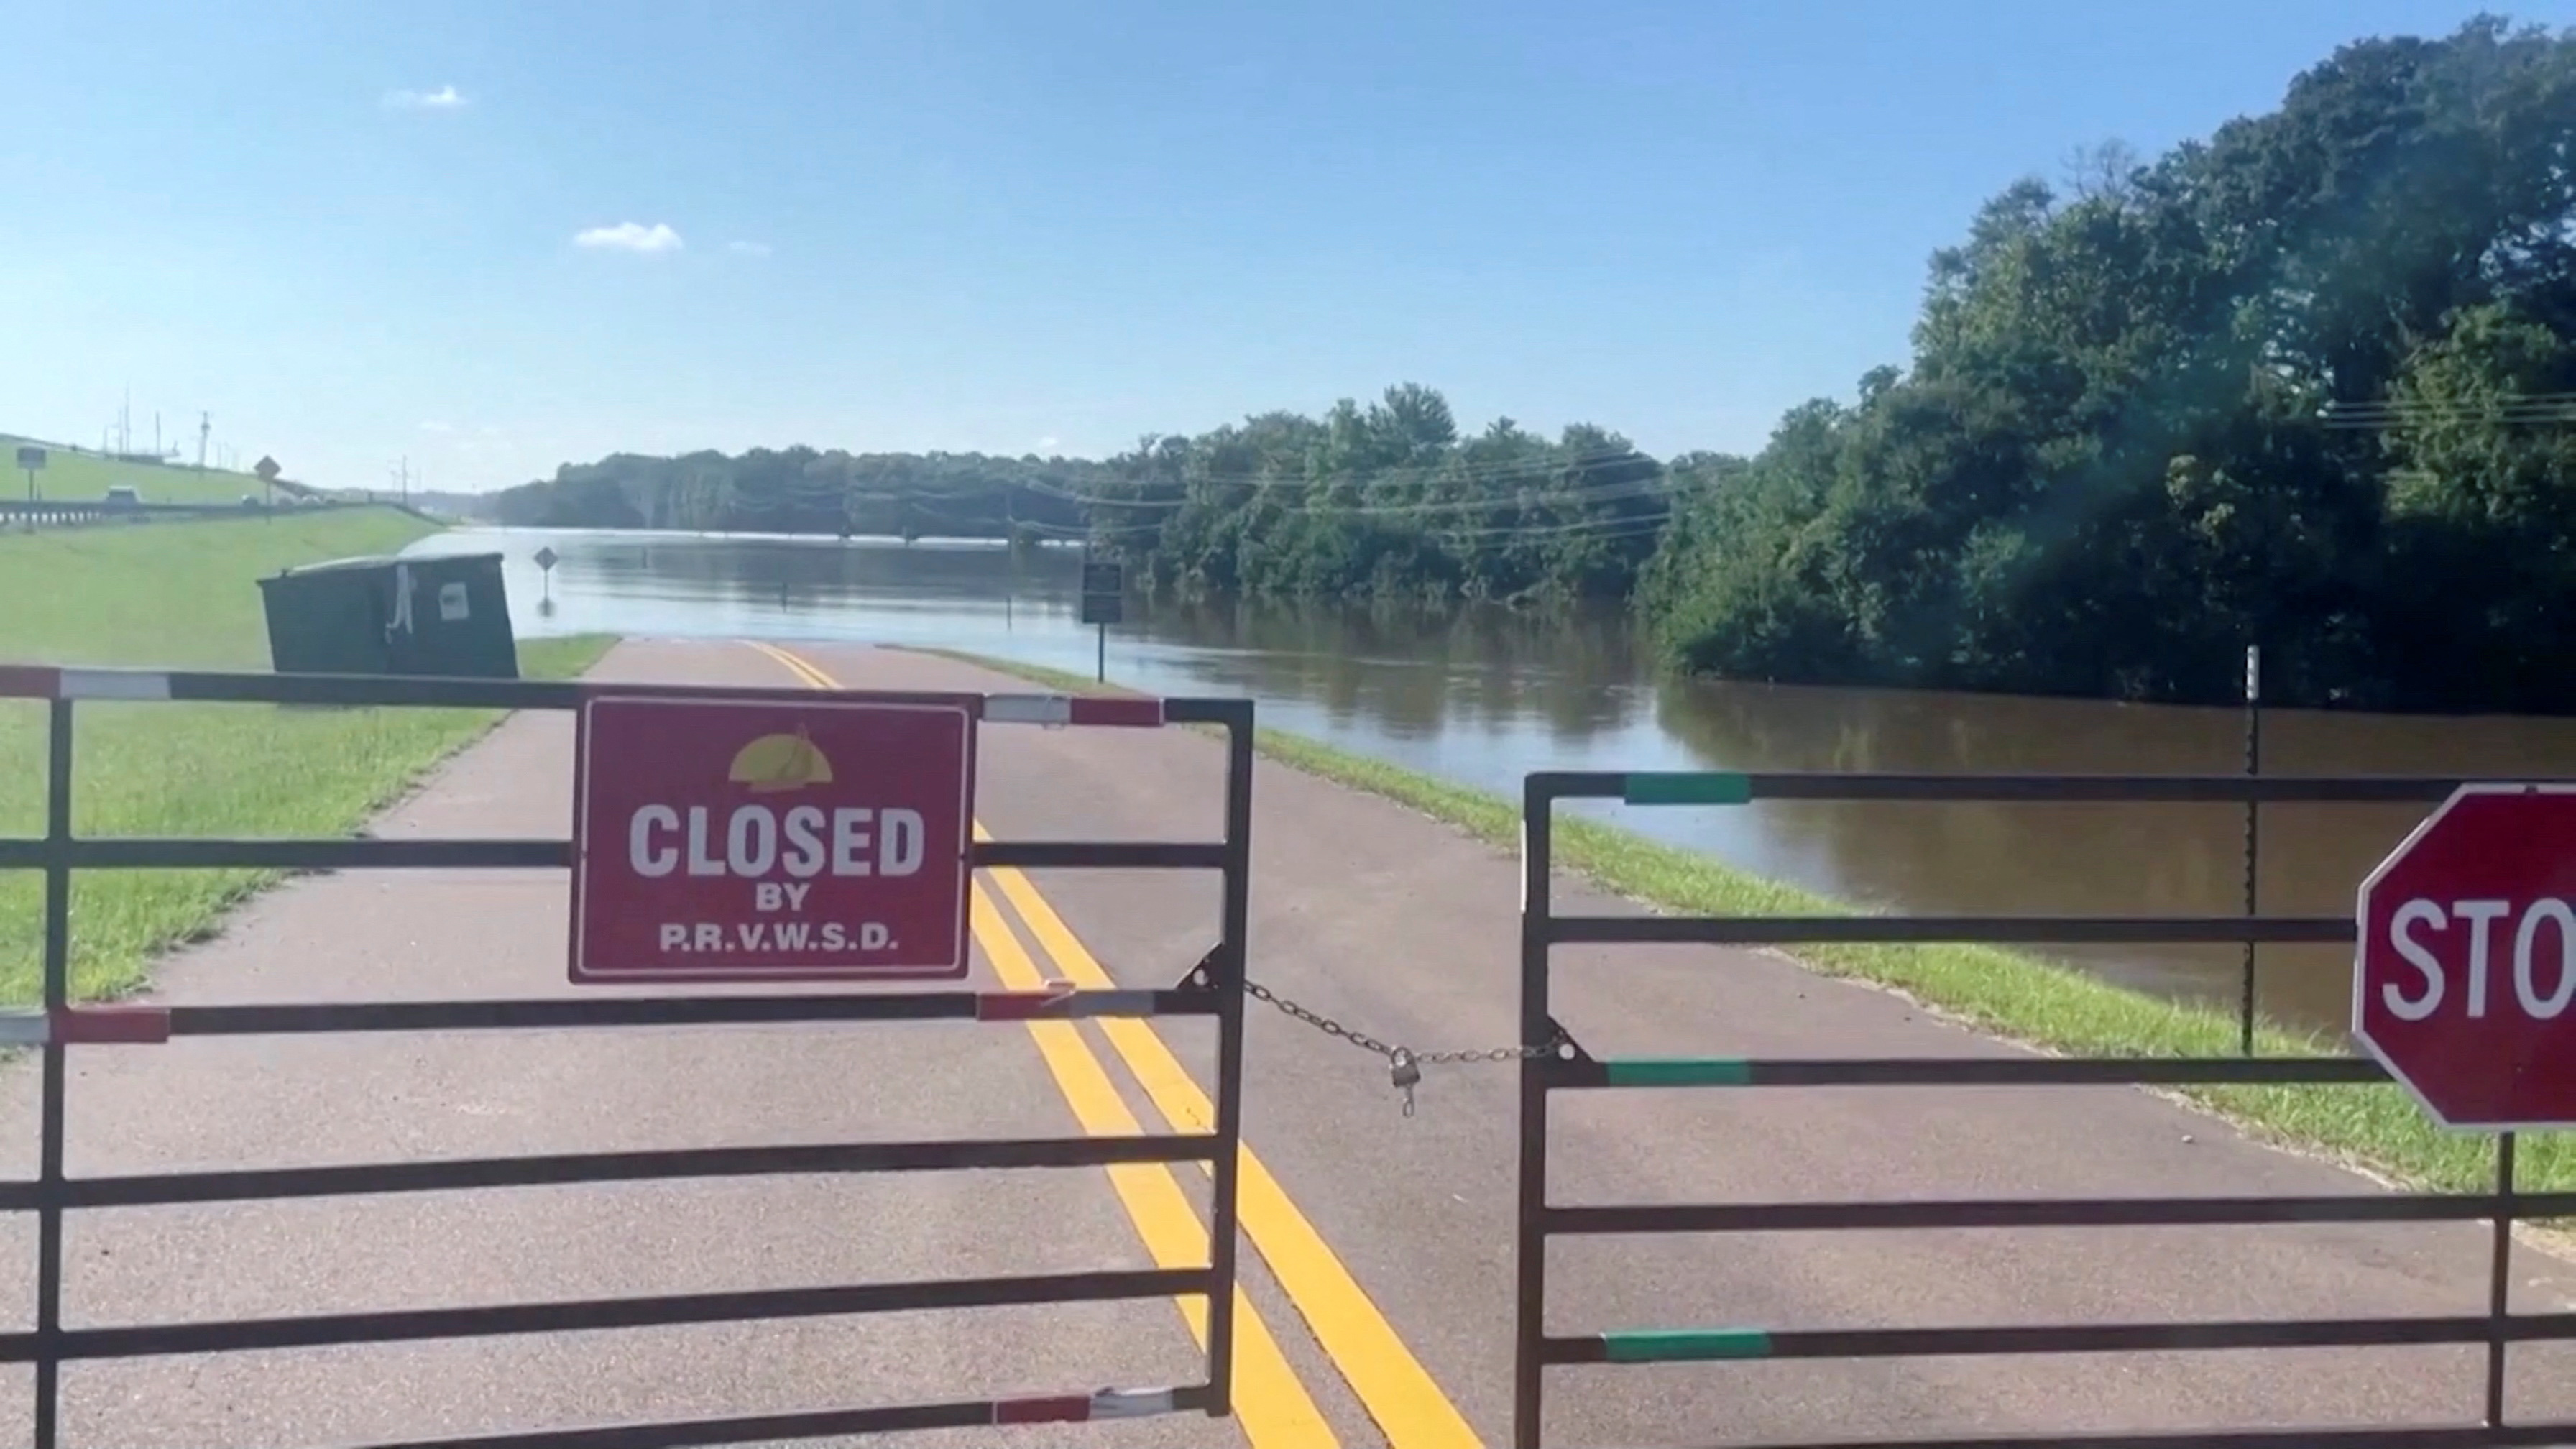 Flood waters in Mississippi cover roads and fields